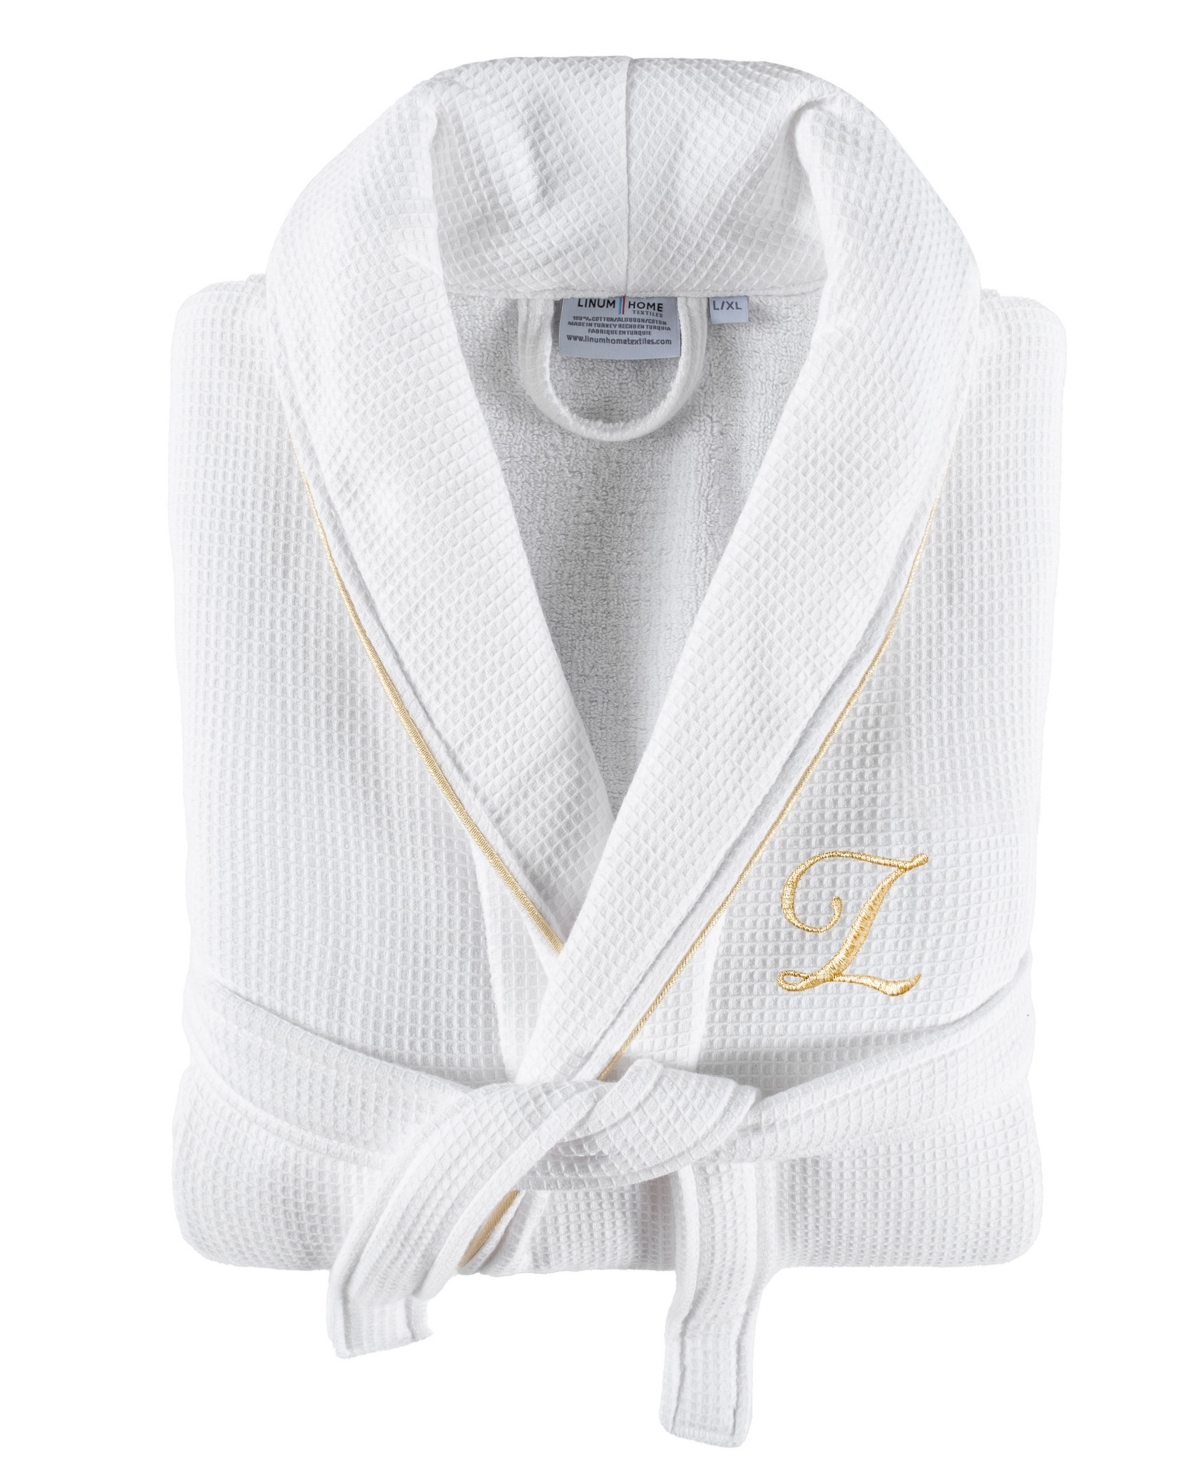 Linum Home Textiles 100% Turkish Cotton Unisex Personalized Waffle Weave Terry Bathrobe With Satin Piped Trim In White Z